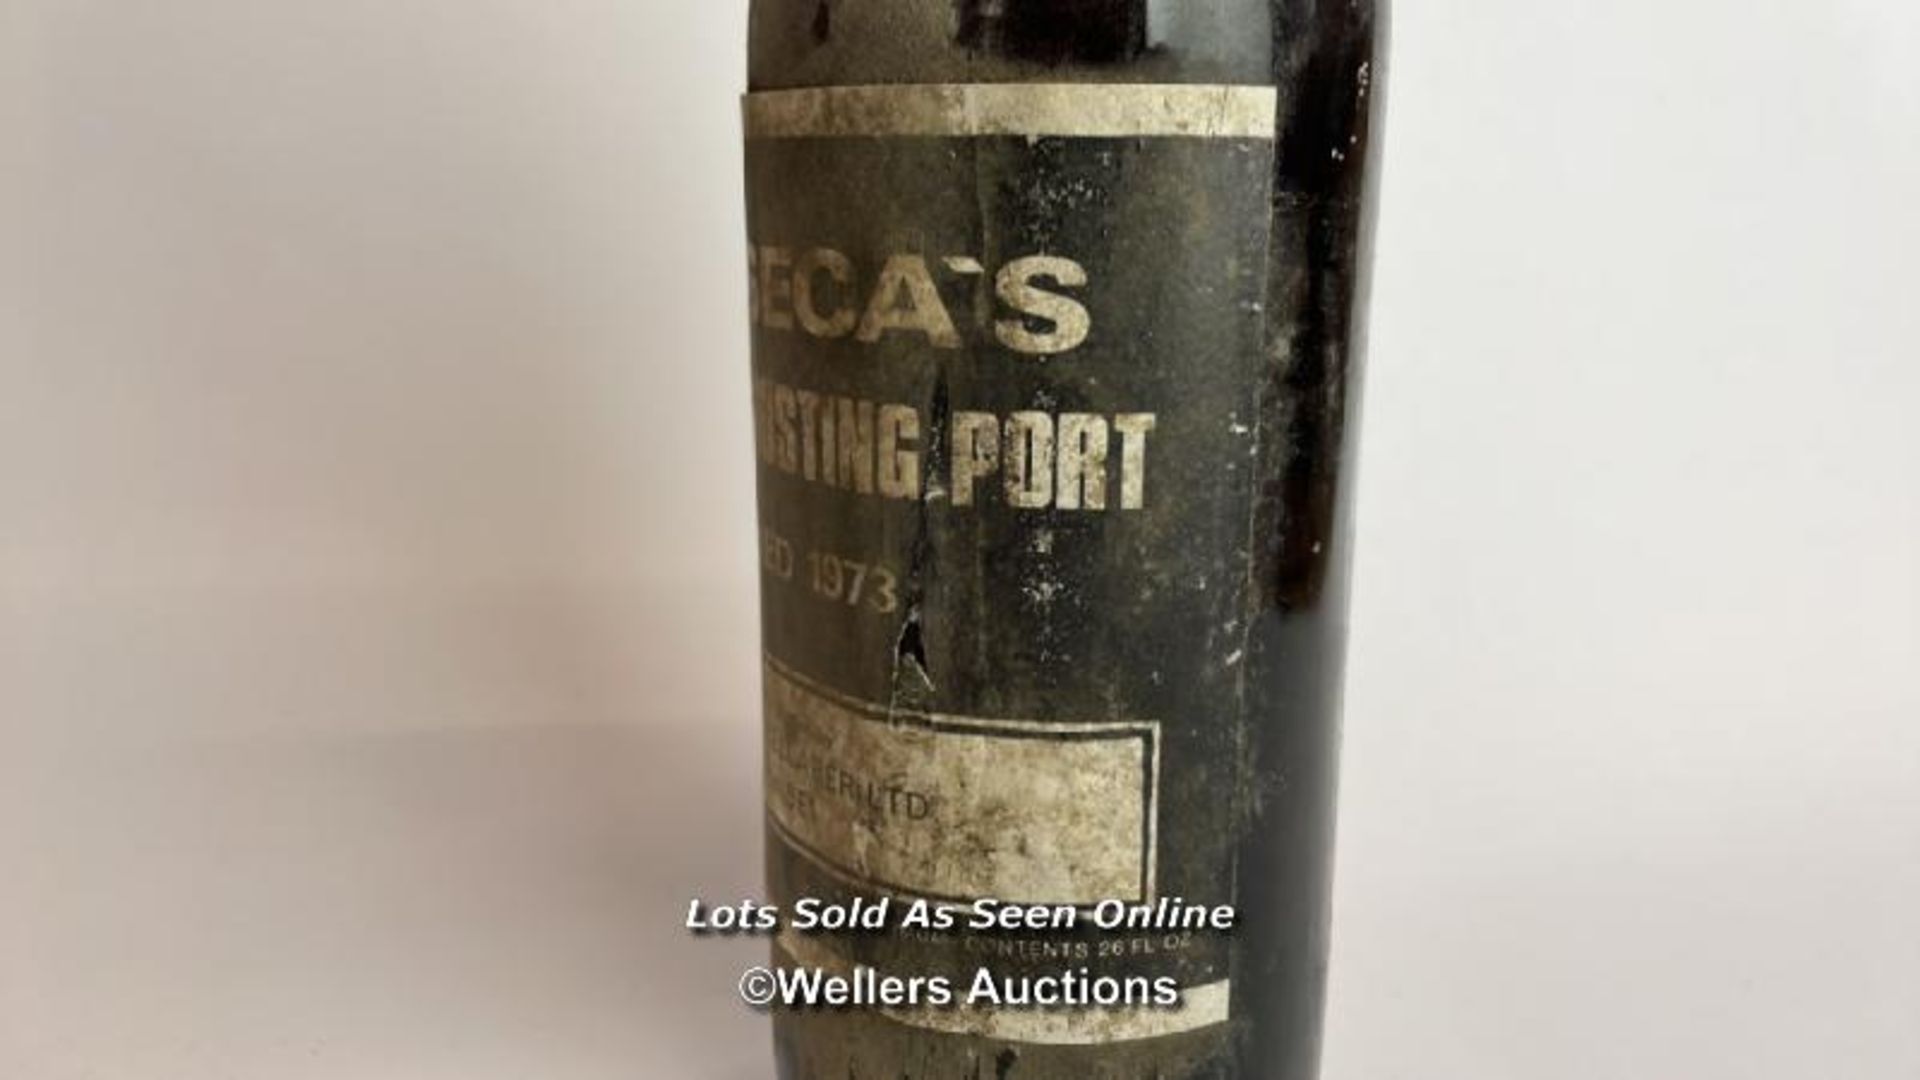 1973 Fonesca's Finest Crusting Port, 26 fl oz / Please see images for fill level and general - Image 4 of 6